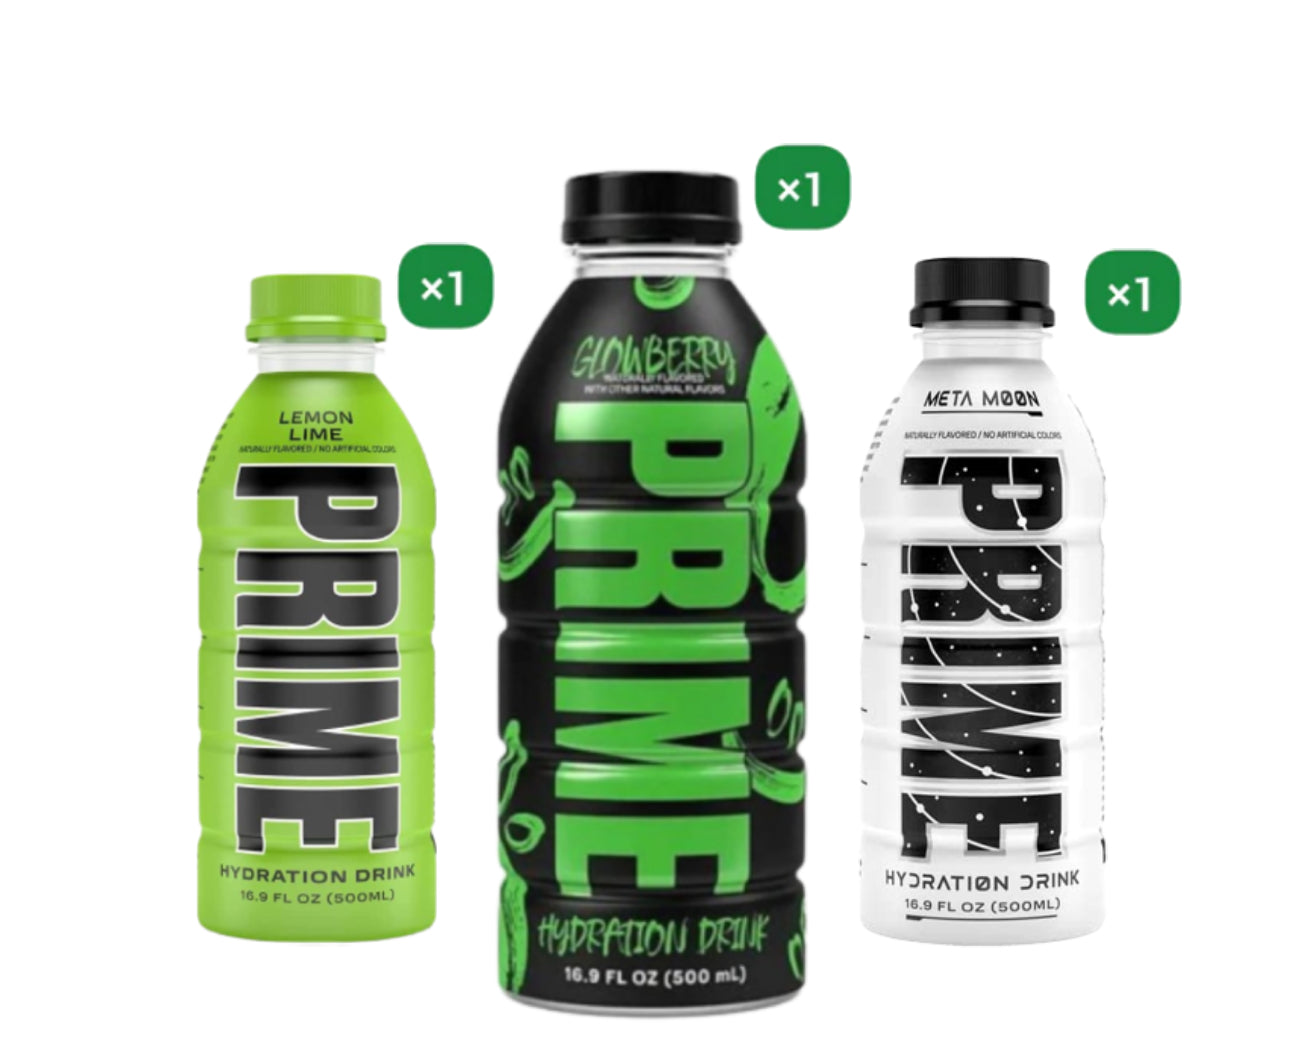 Prime Hydration Drink 500ml Glowberry x Prime Hydration Drink Meta Moon x Prime Hydration Drink Lemon Lime